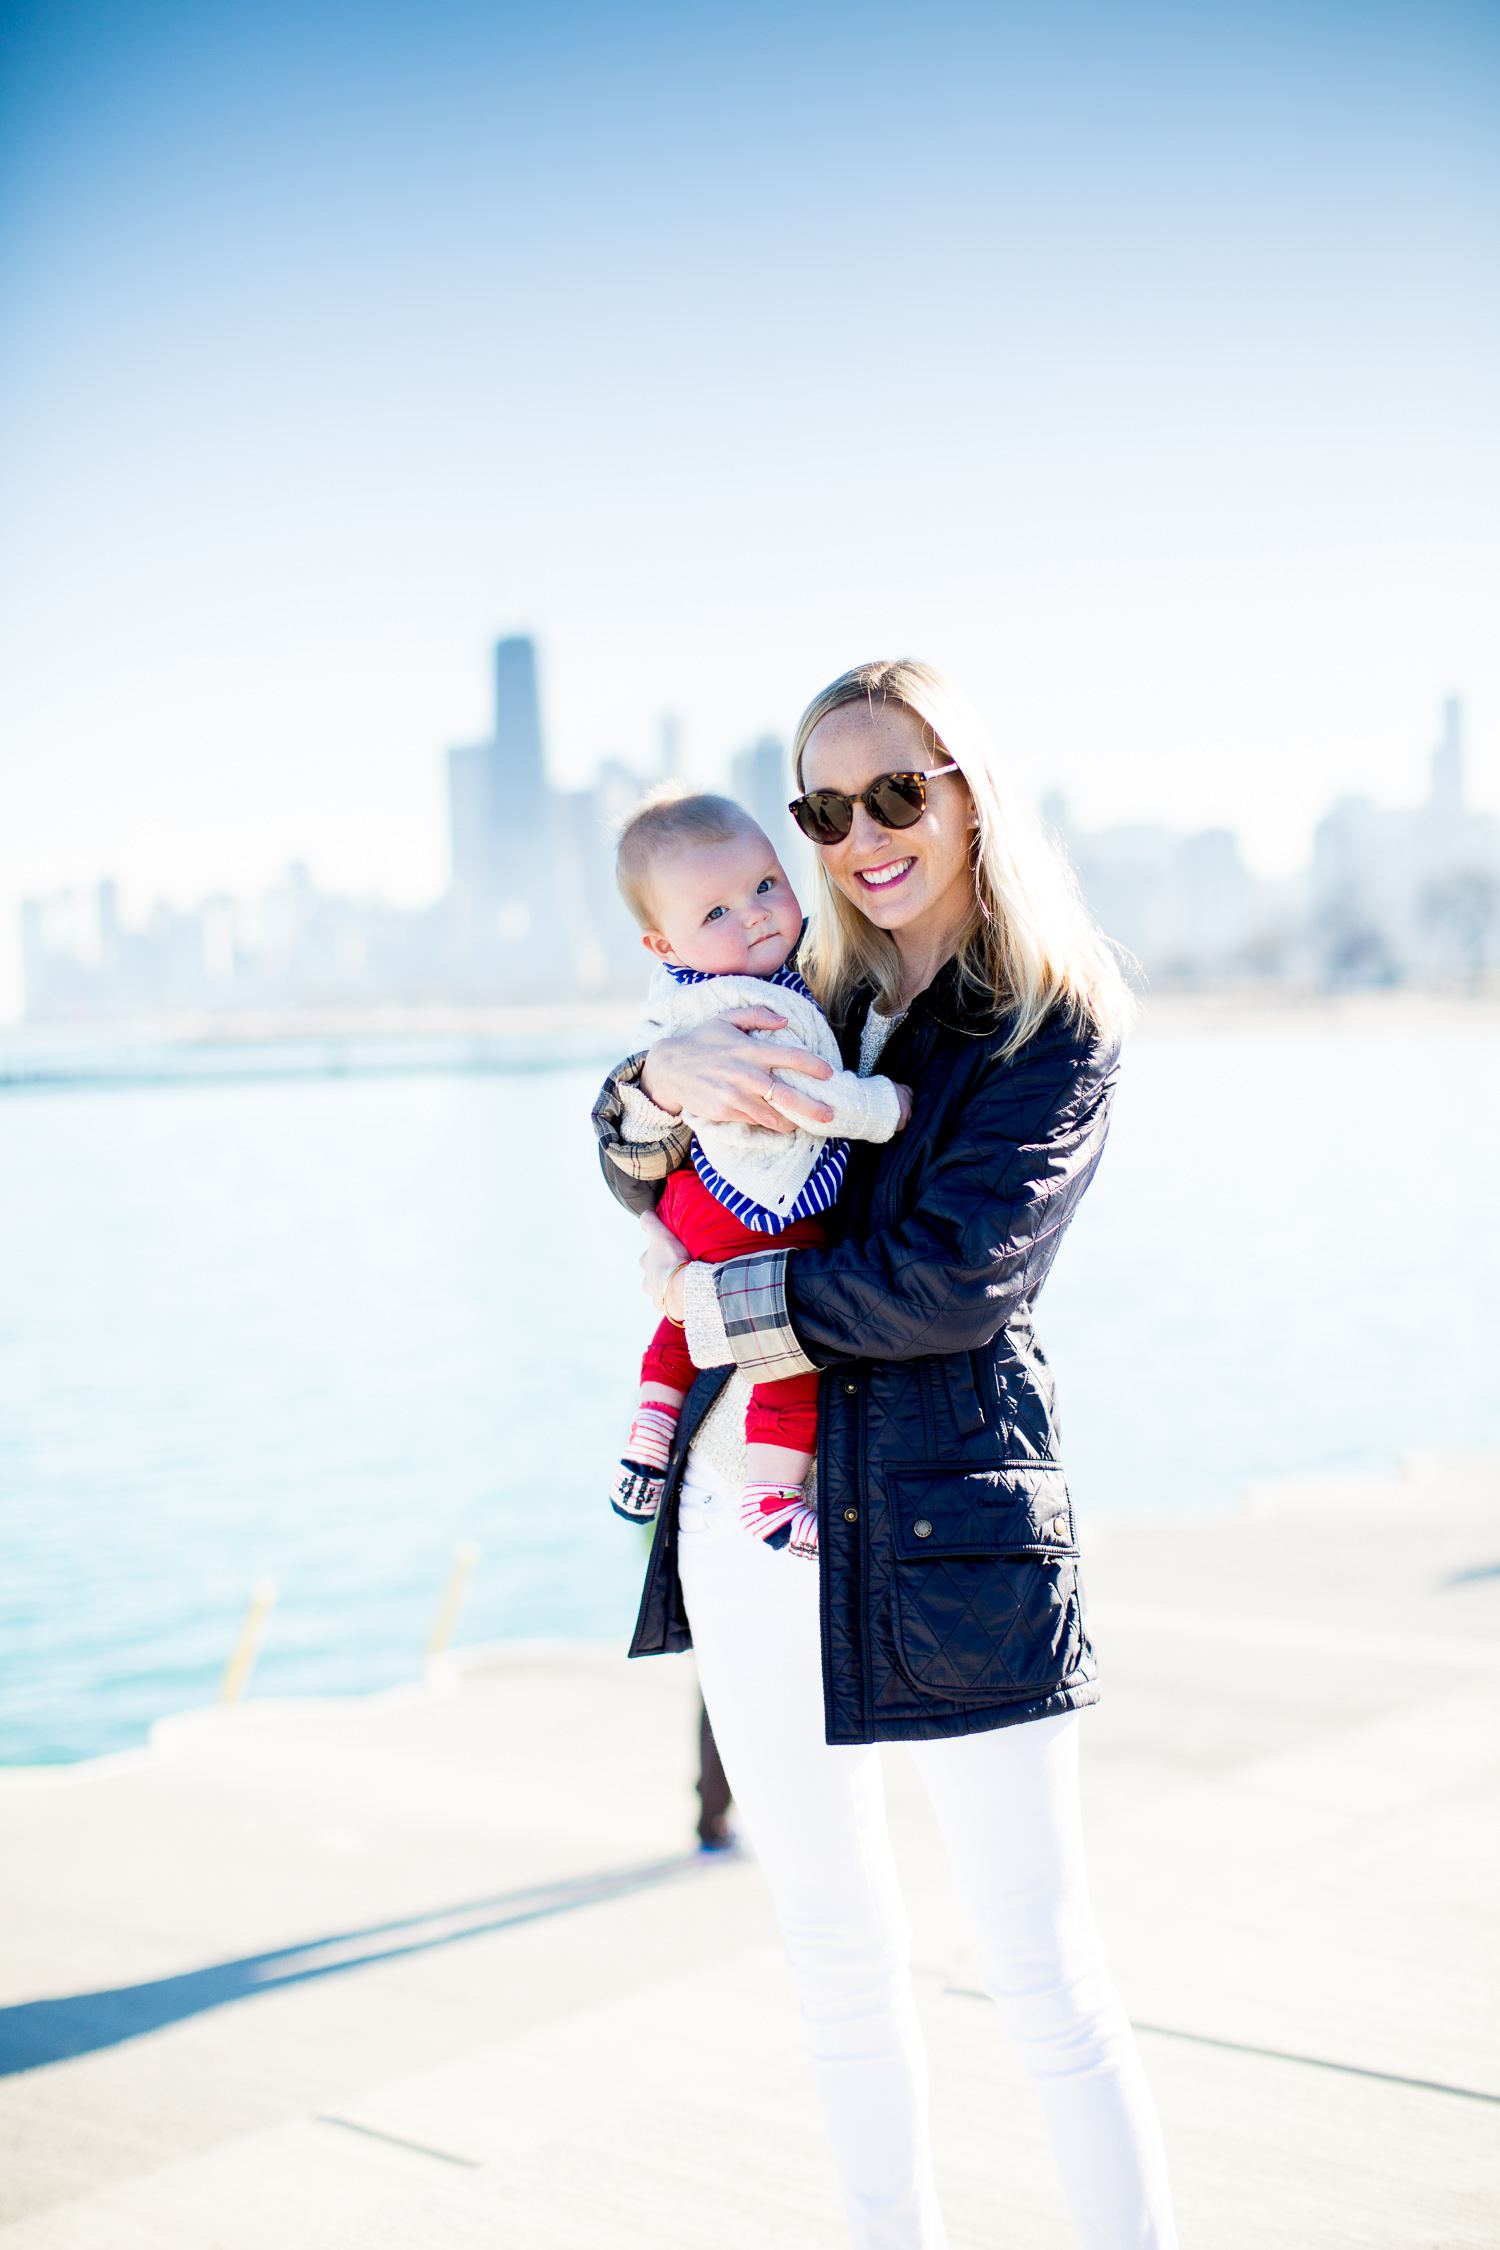 Kelly in the City - A Preppy Chicago Life, Style and Fashion Blog